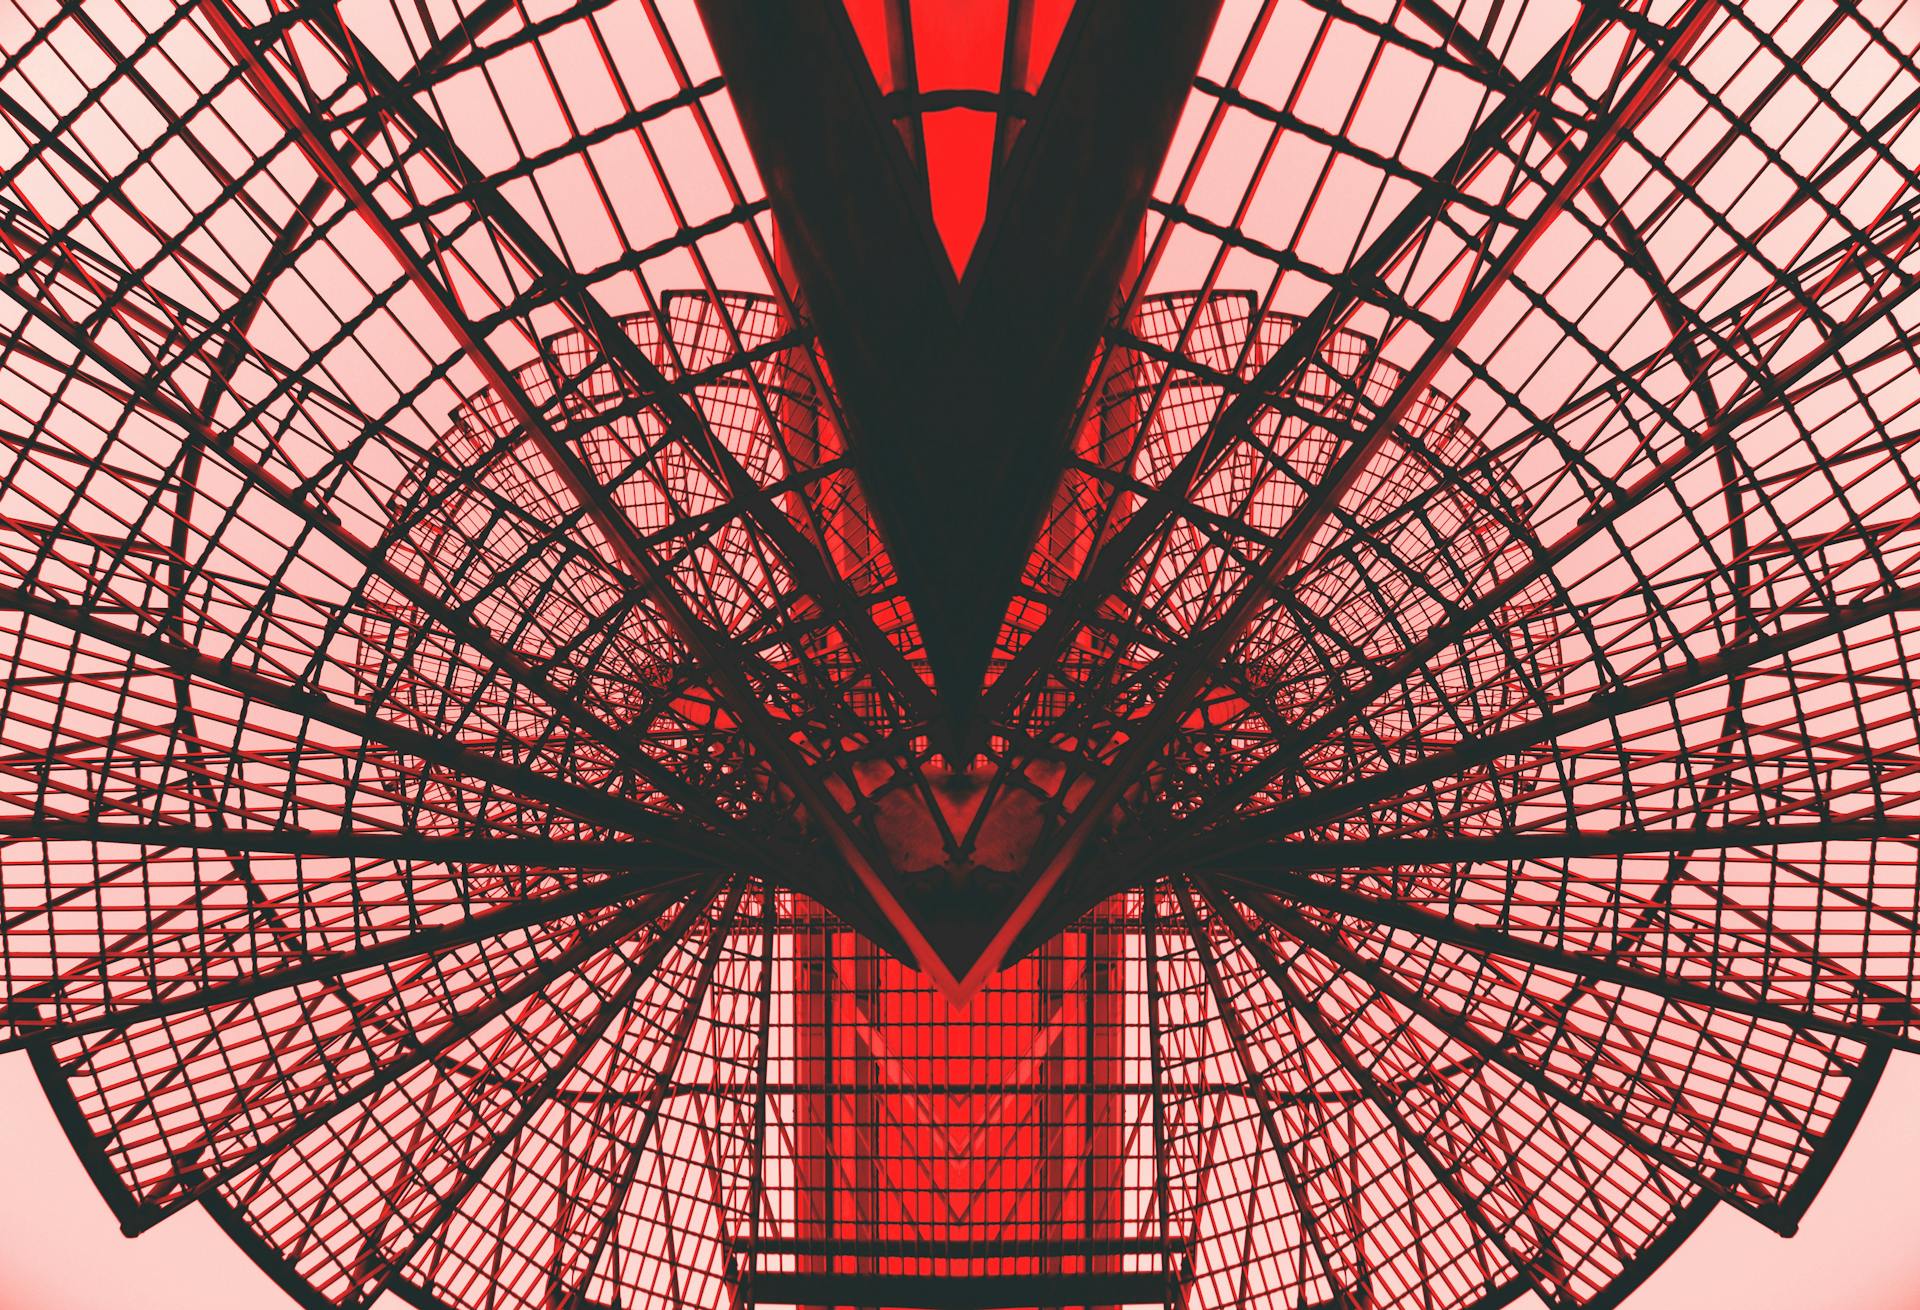 A creative photo of a complex red metal tower.